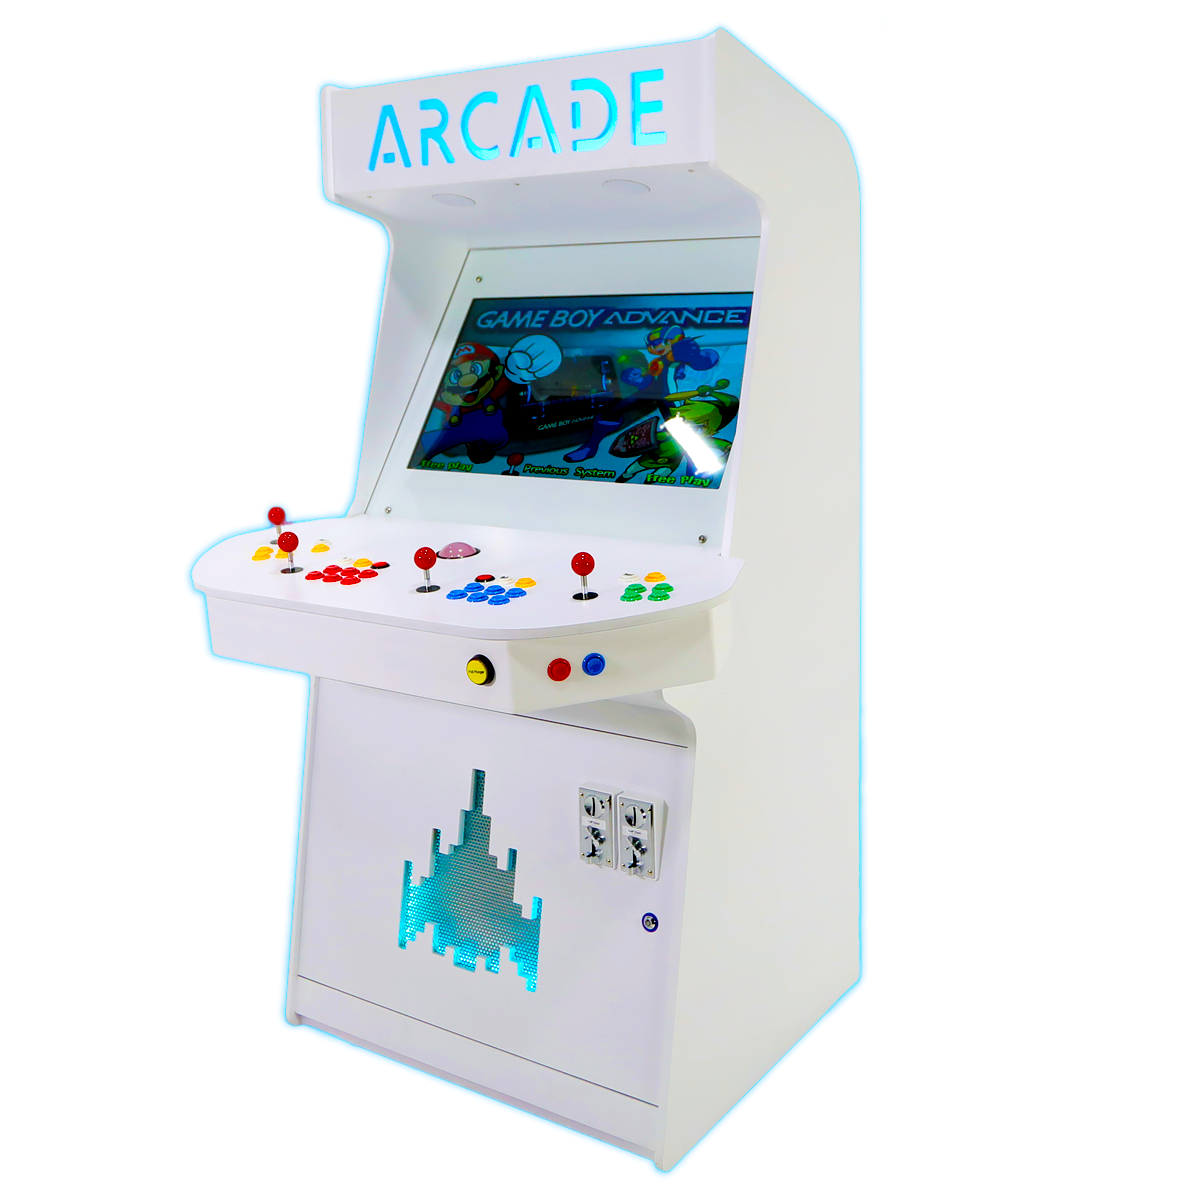 Full-Sized Two Player Upright Arcade Game With Trackball And 3,000 Games  For Sale